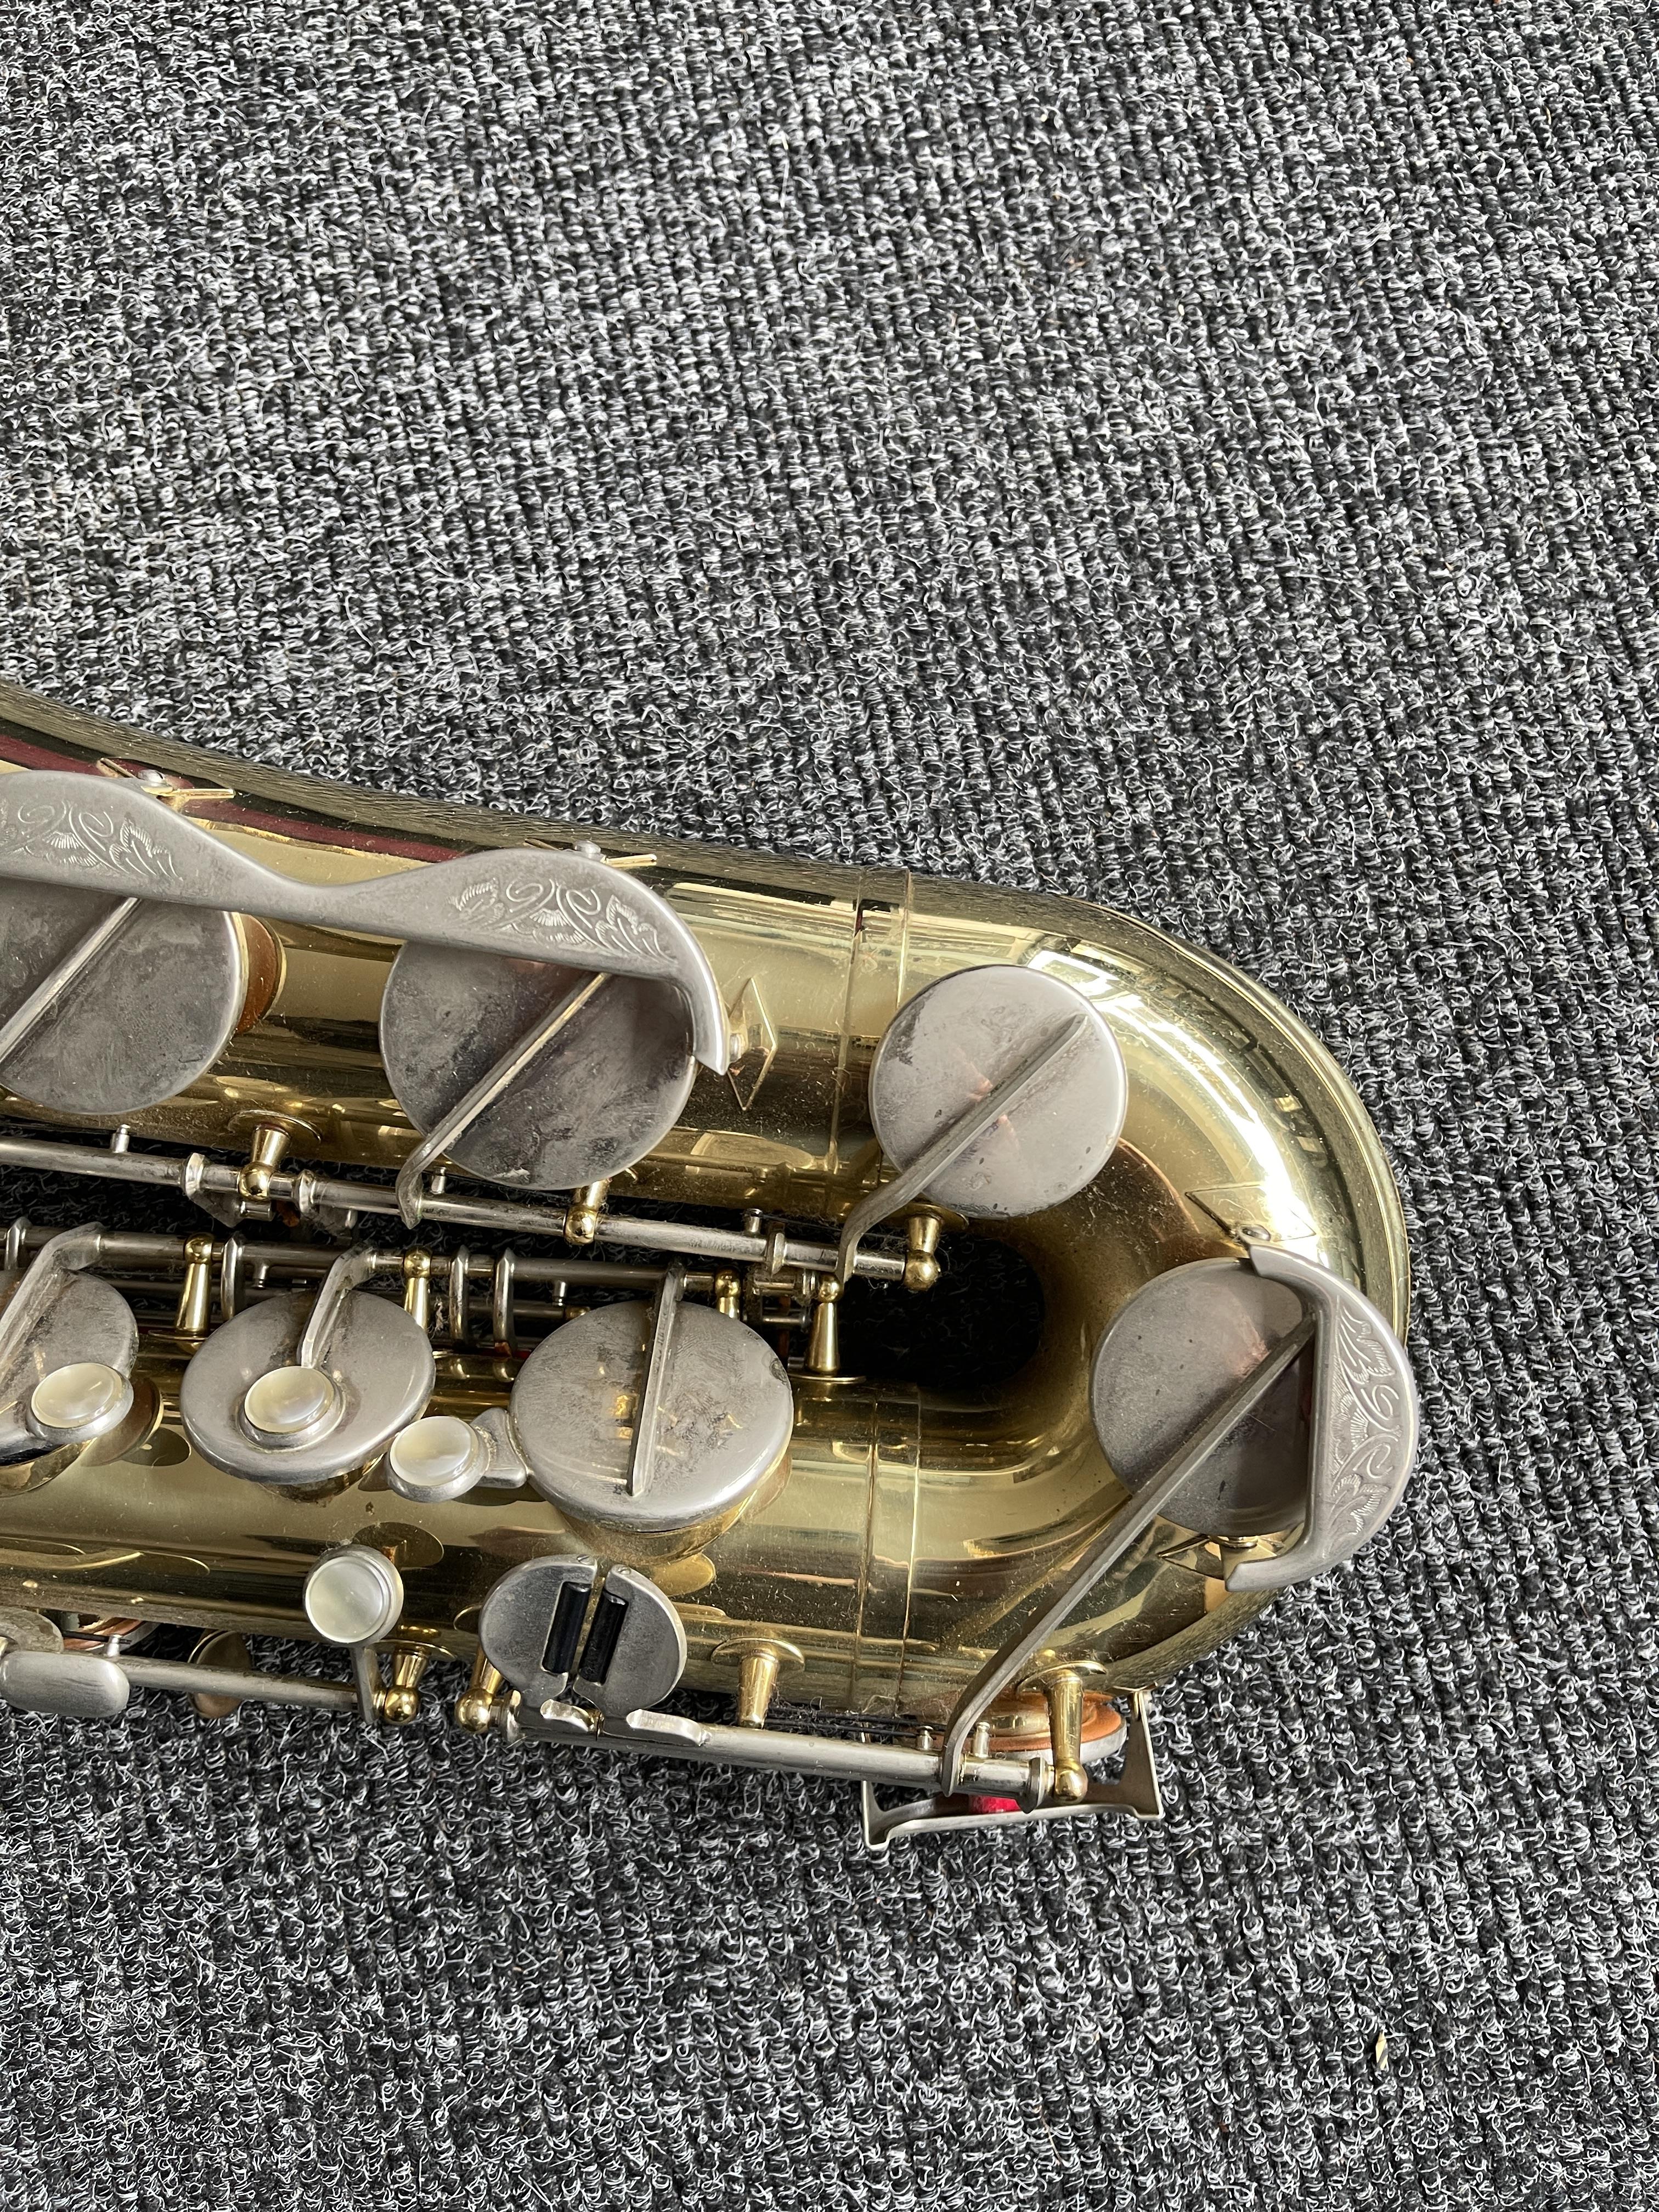 B&H 400 made for Boosey & Hawkes Cased Saxophone. - Image 10 of 31